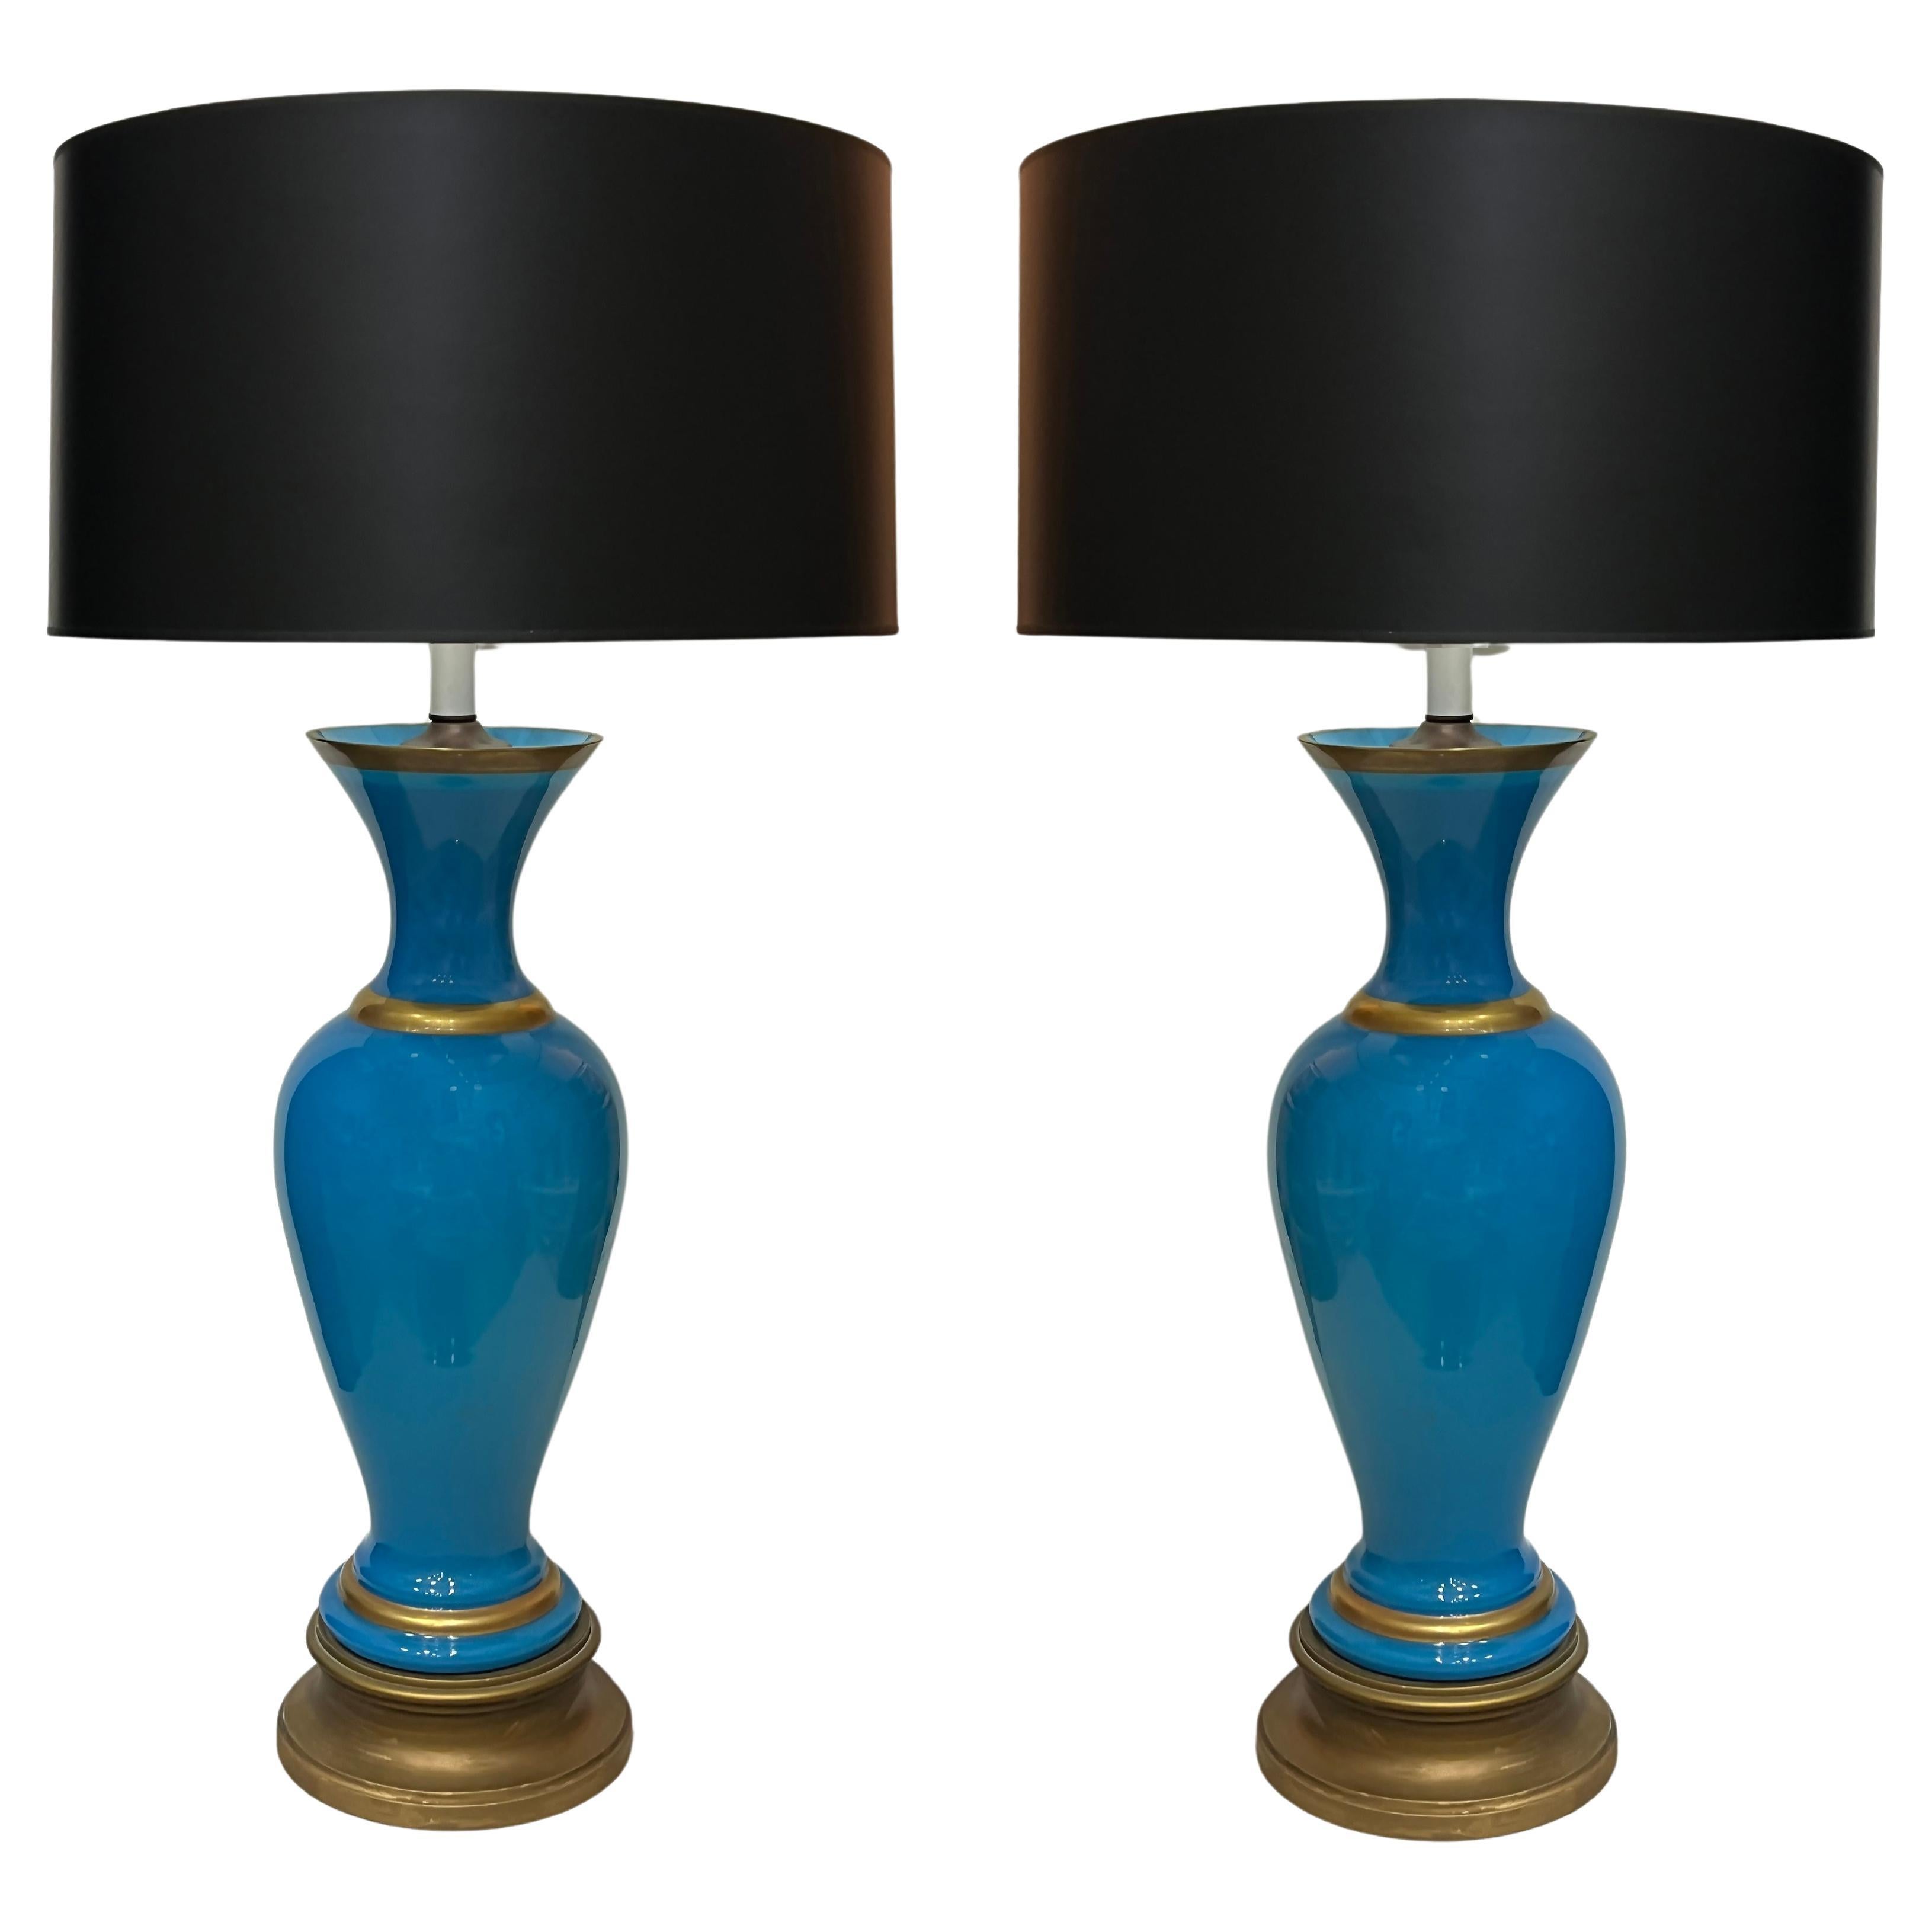 1950s French Blue Opaline Glass Table Lamps With Gilt Details, Pair For Sale